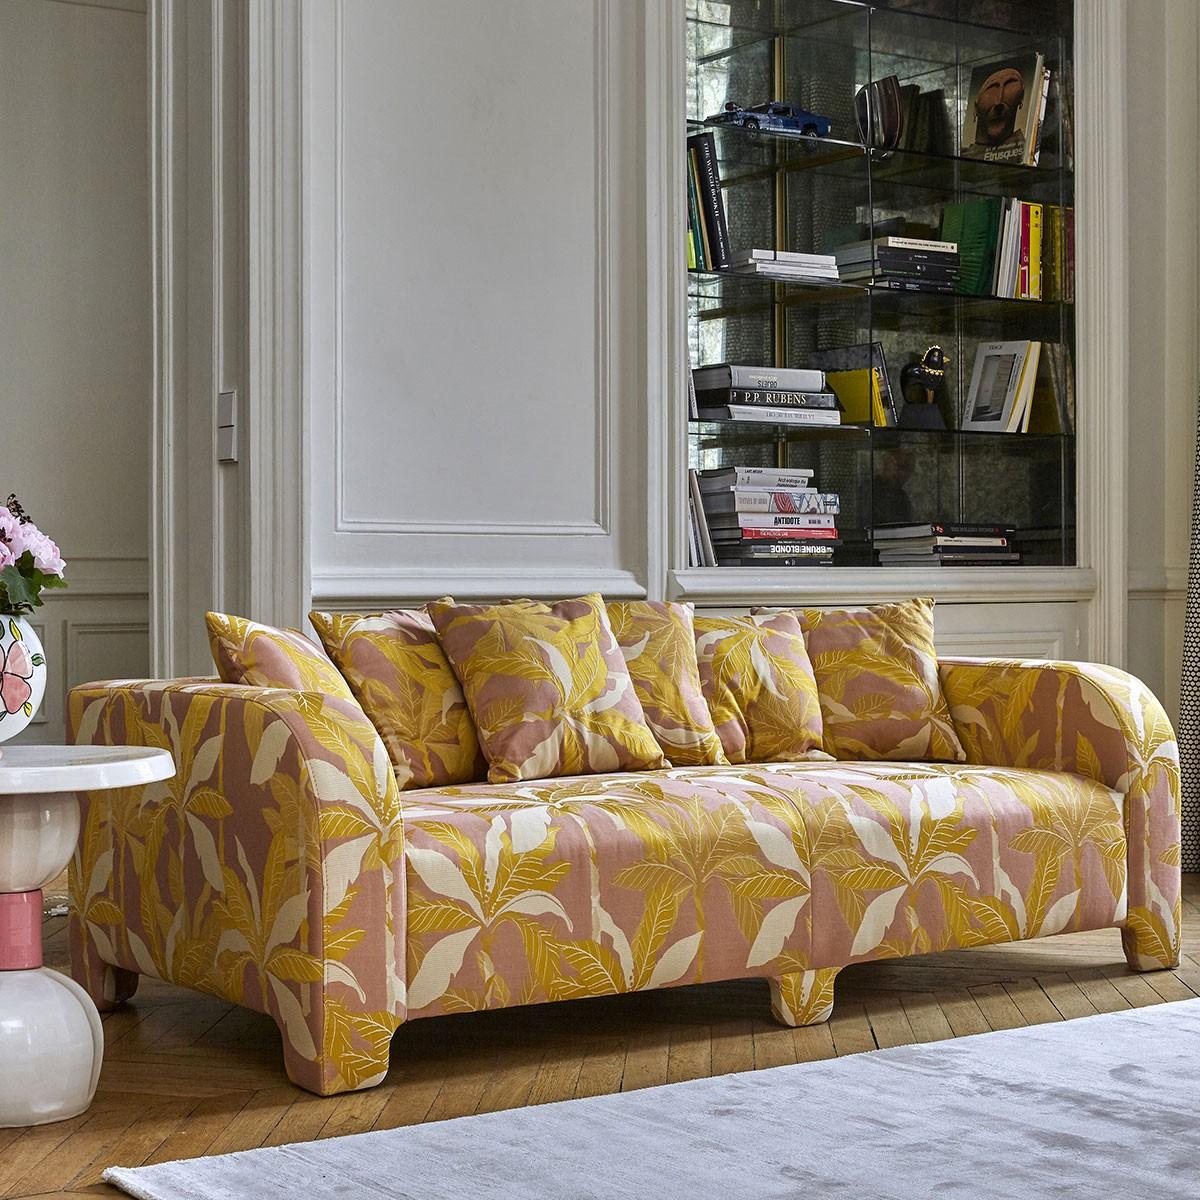 Popus Editions Graziella 2 seater sofa in saffron zanzi linen fabric

A foot that hides another. A cushion that hides another. A curve that hides another with contemporary lines and a base like a punctuation mark, this sofa gives pride of place to